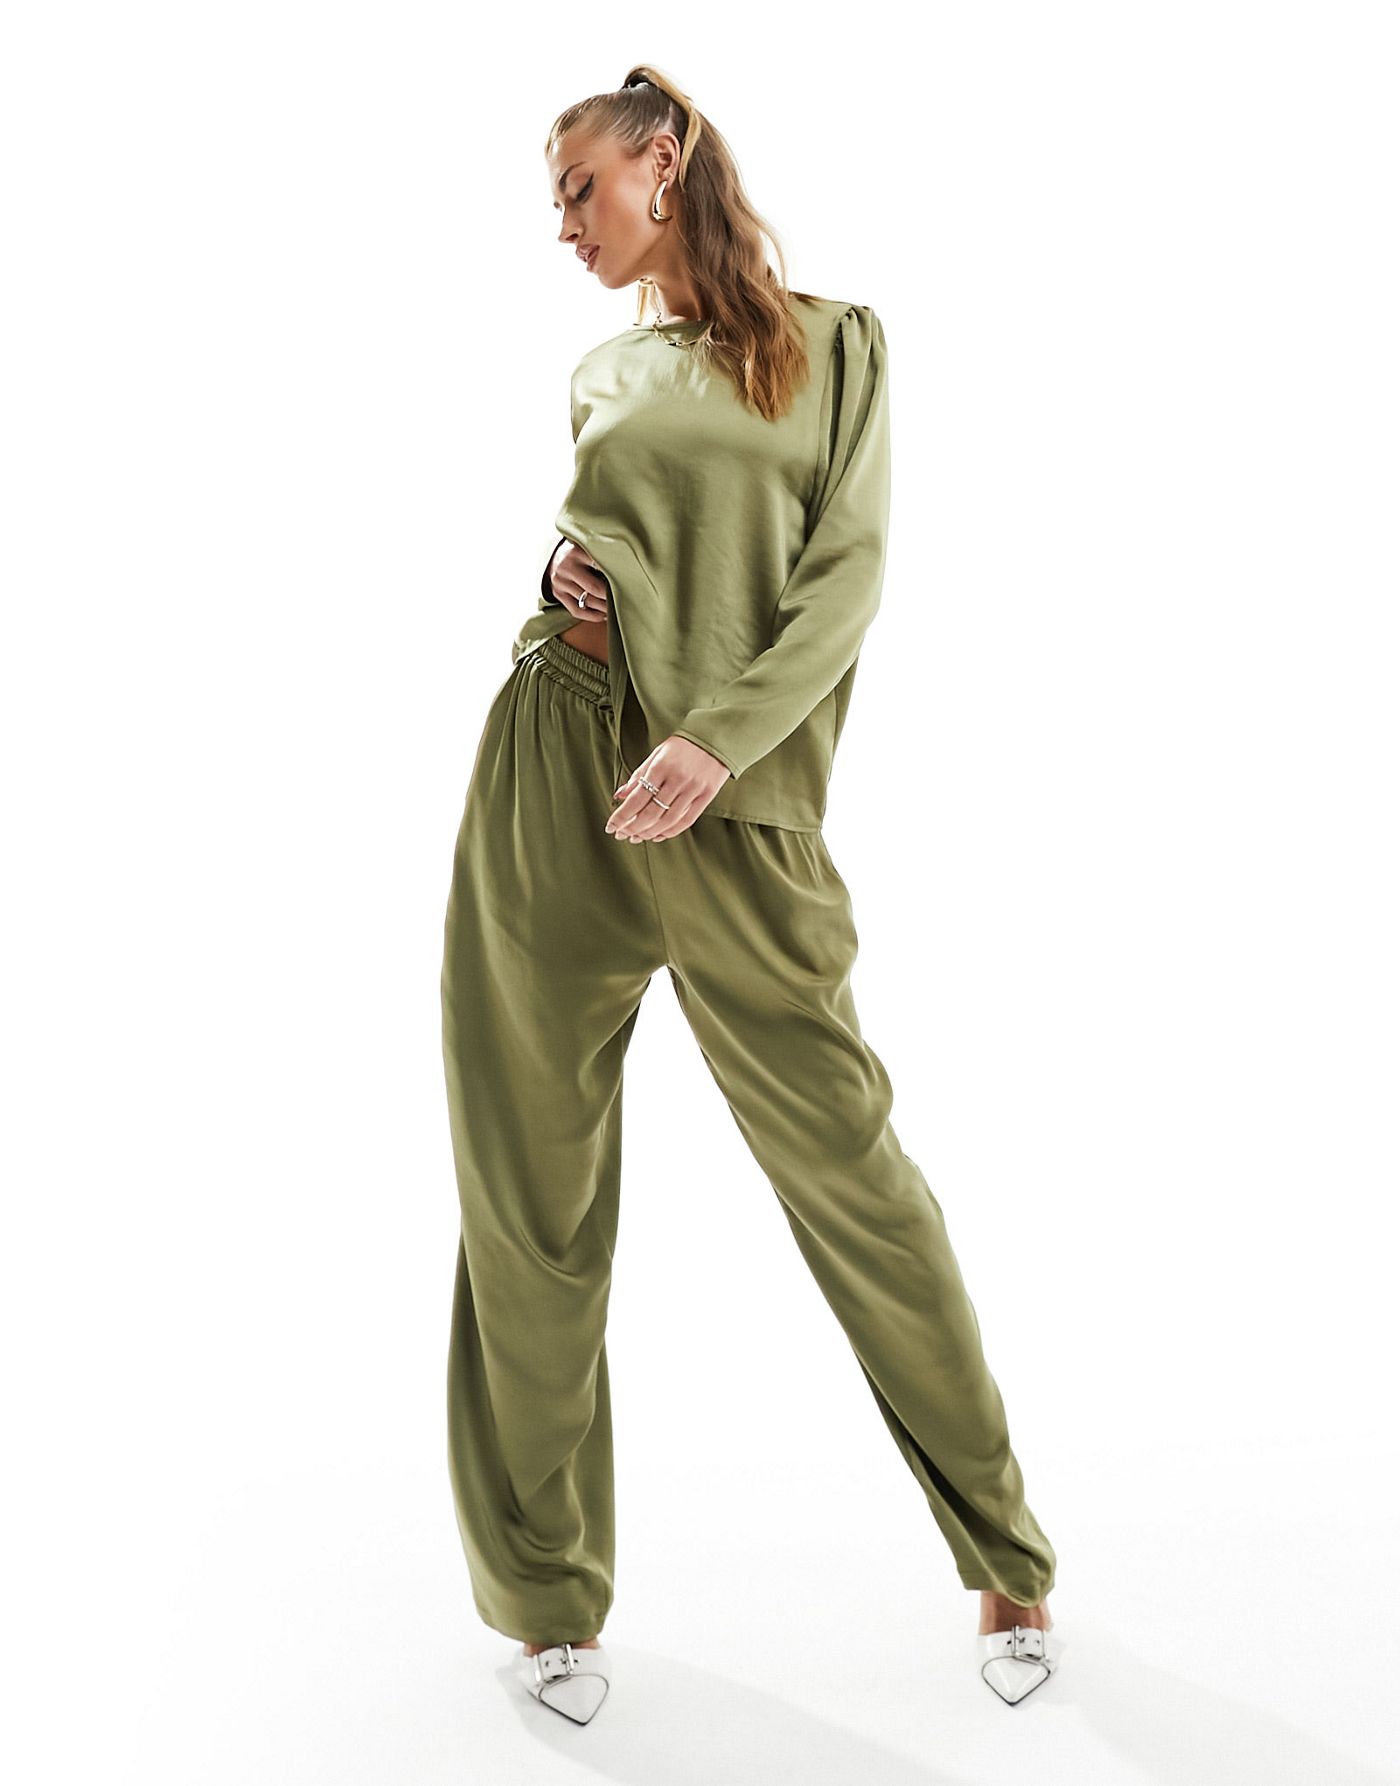 Flounce London satin floaty trousers in olive co-ord